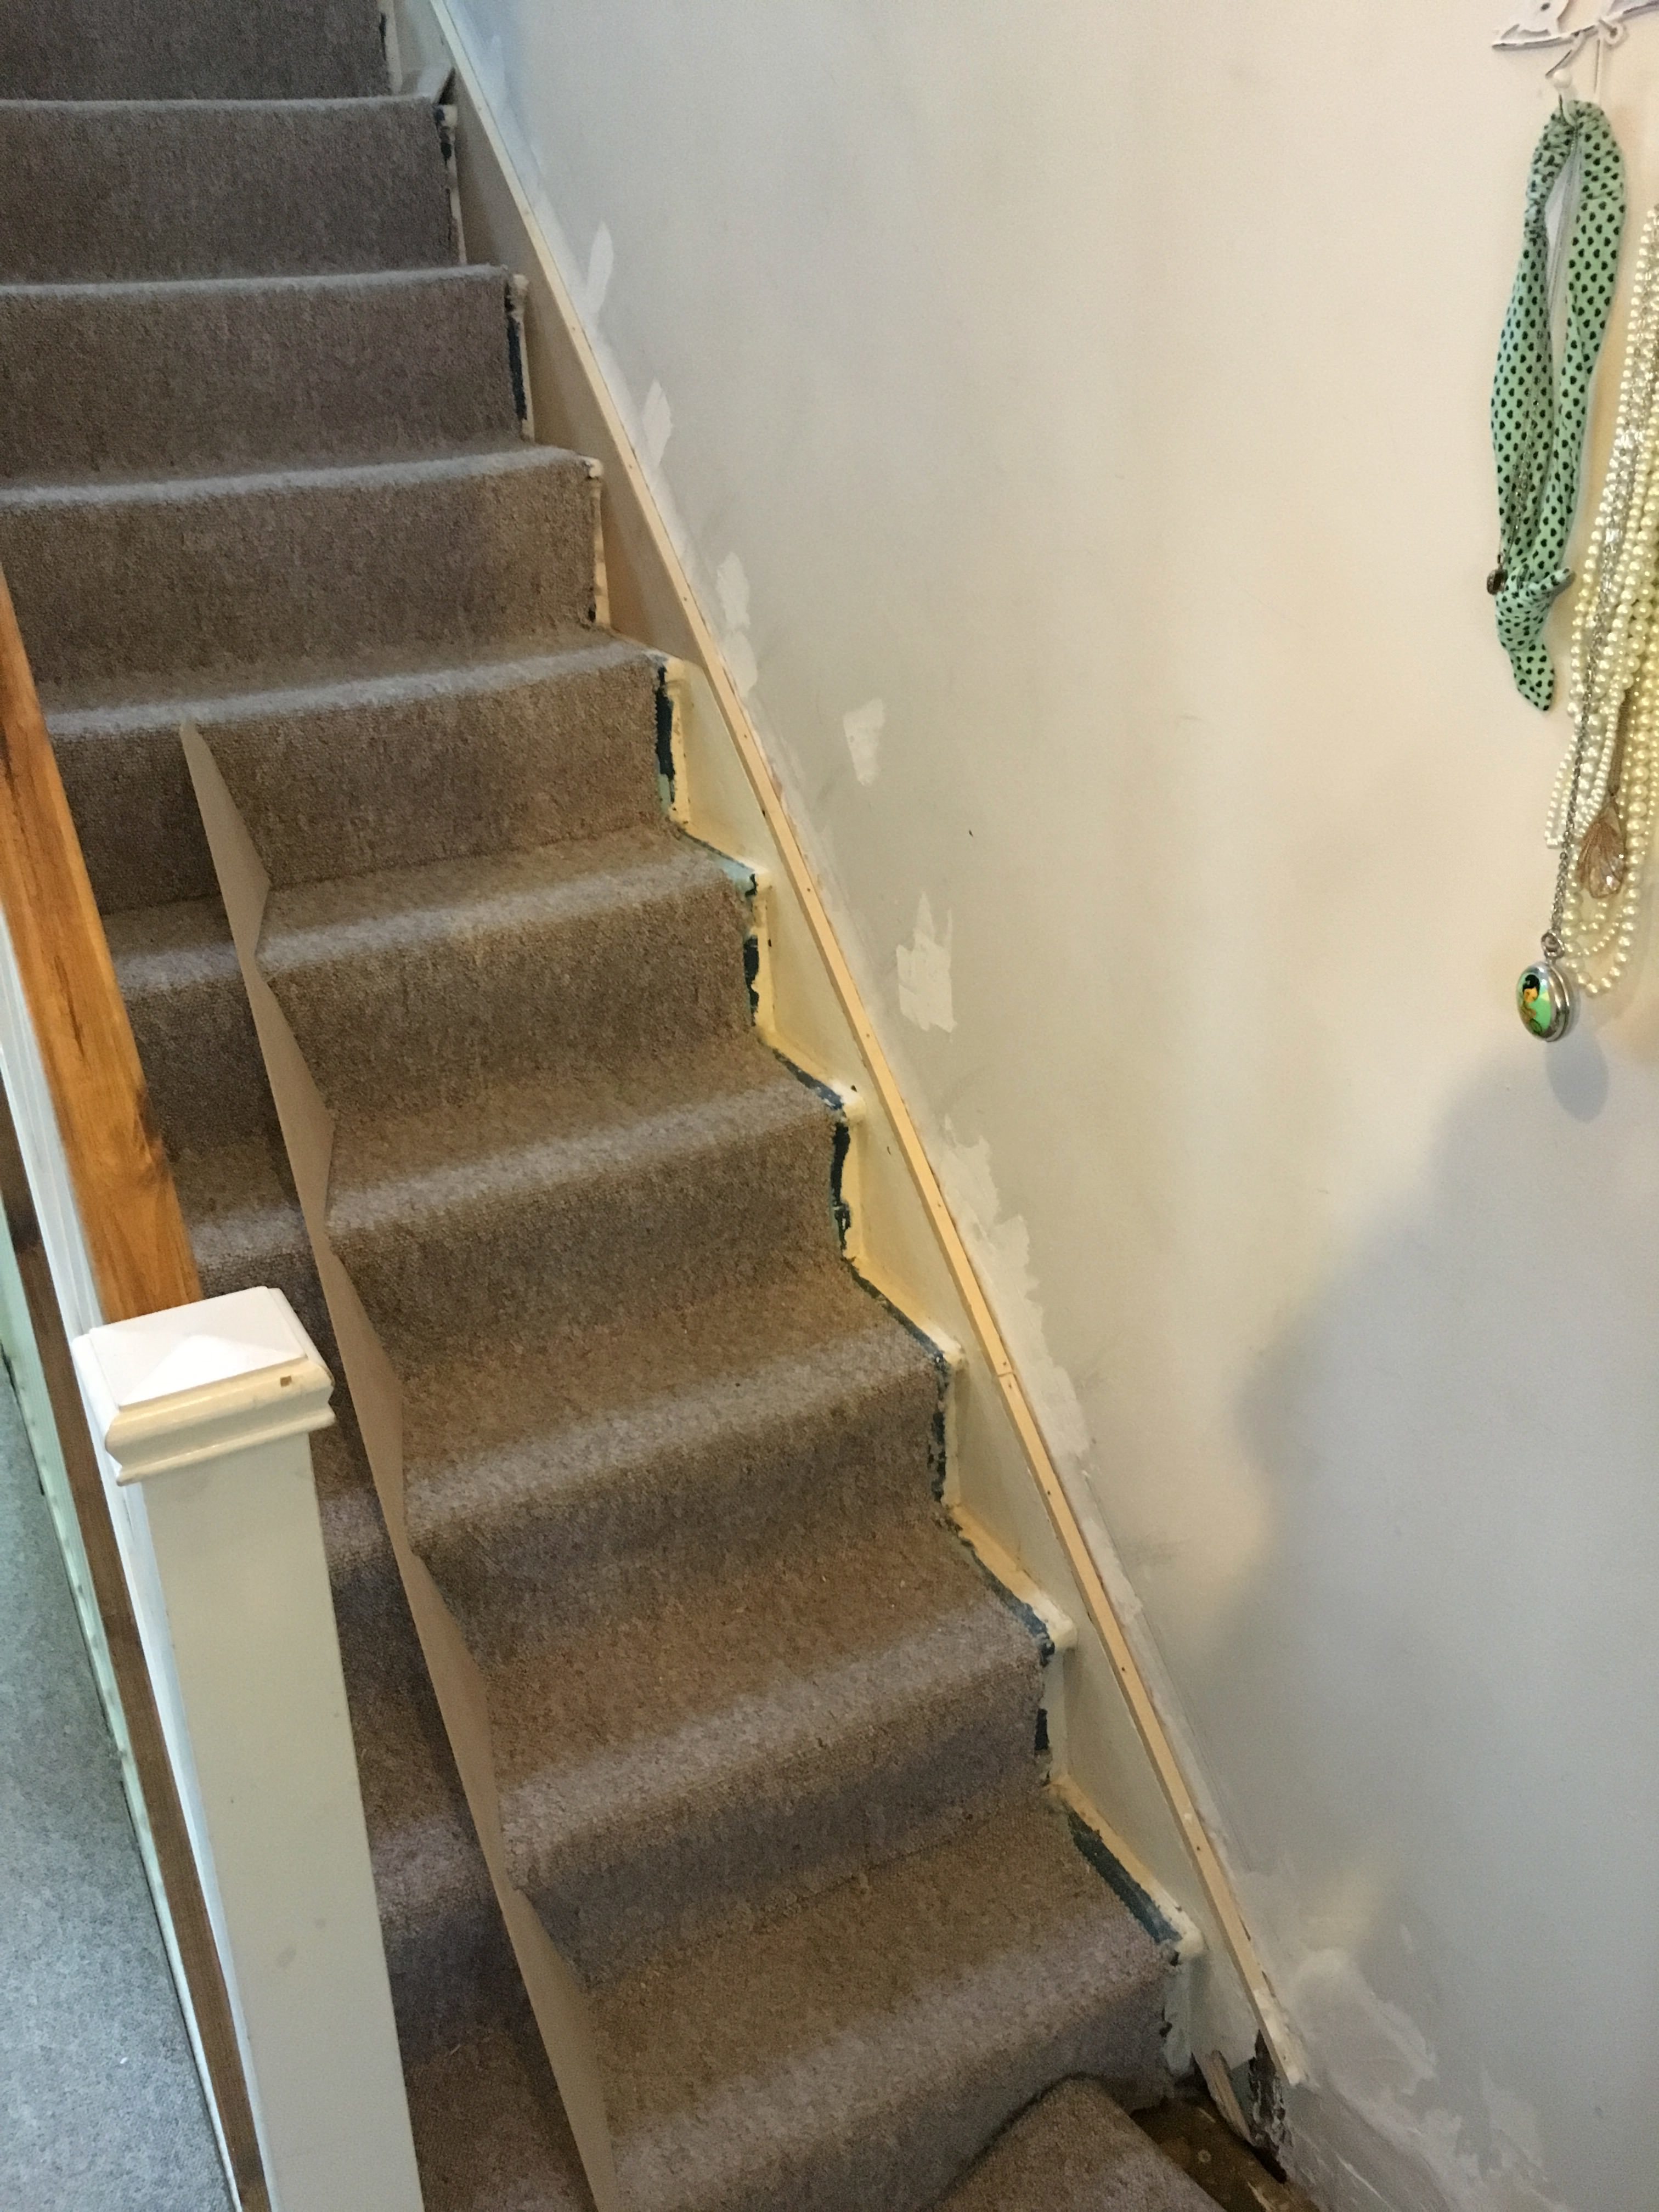 DIY Stair Trim - How to Add a Faux Stair Skirt - The Crazy Craft Lady